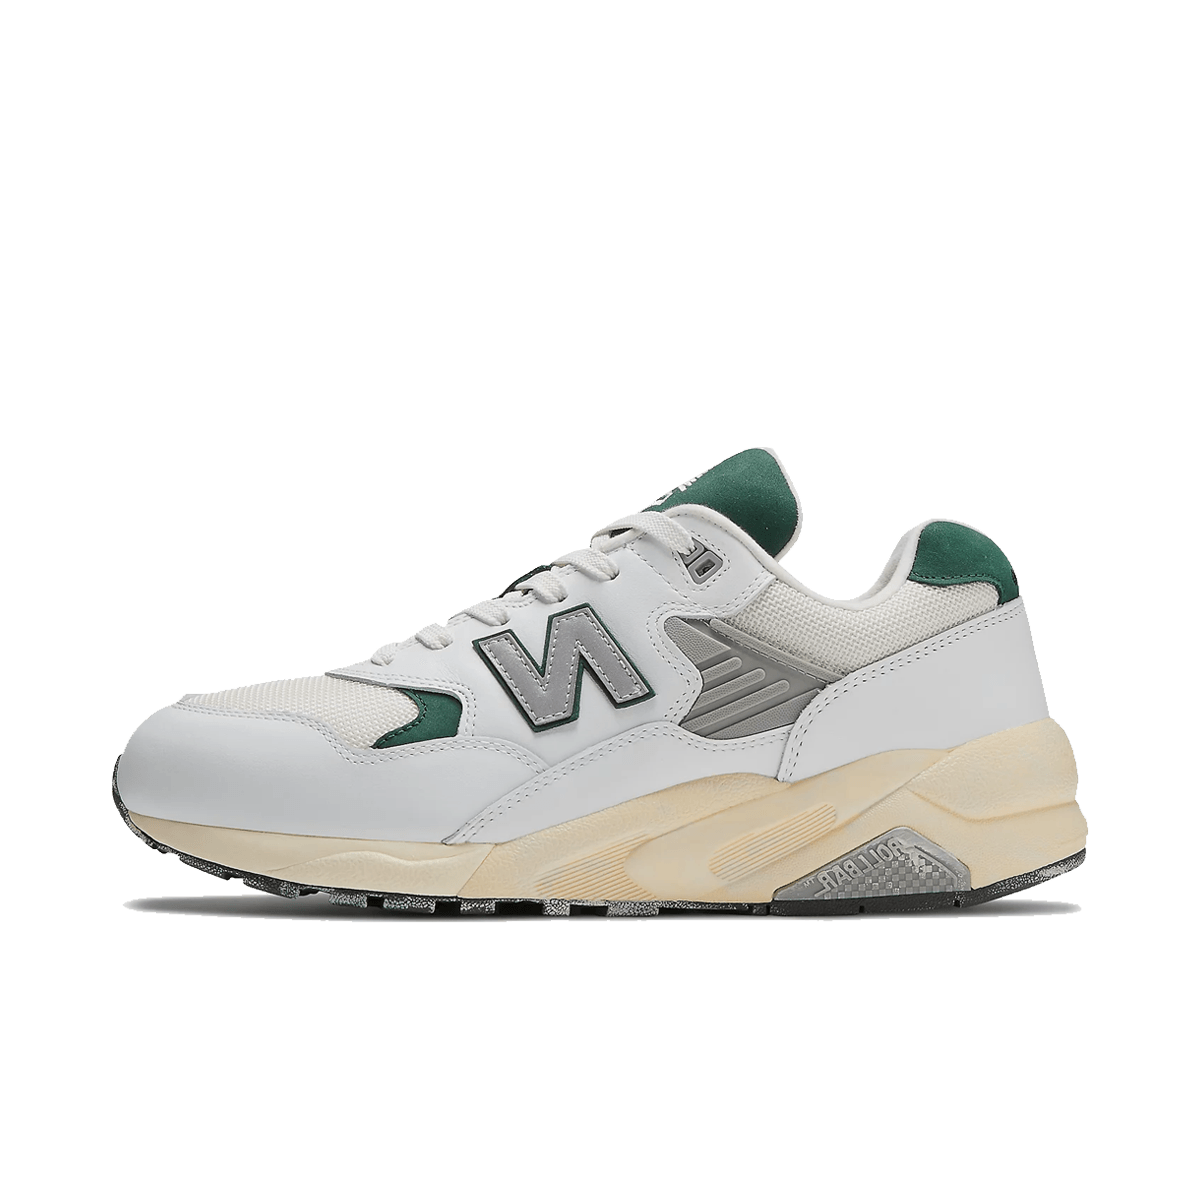 New Balance 580 'White and Nightwatch Green' MT580RCA